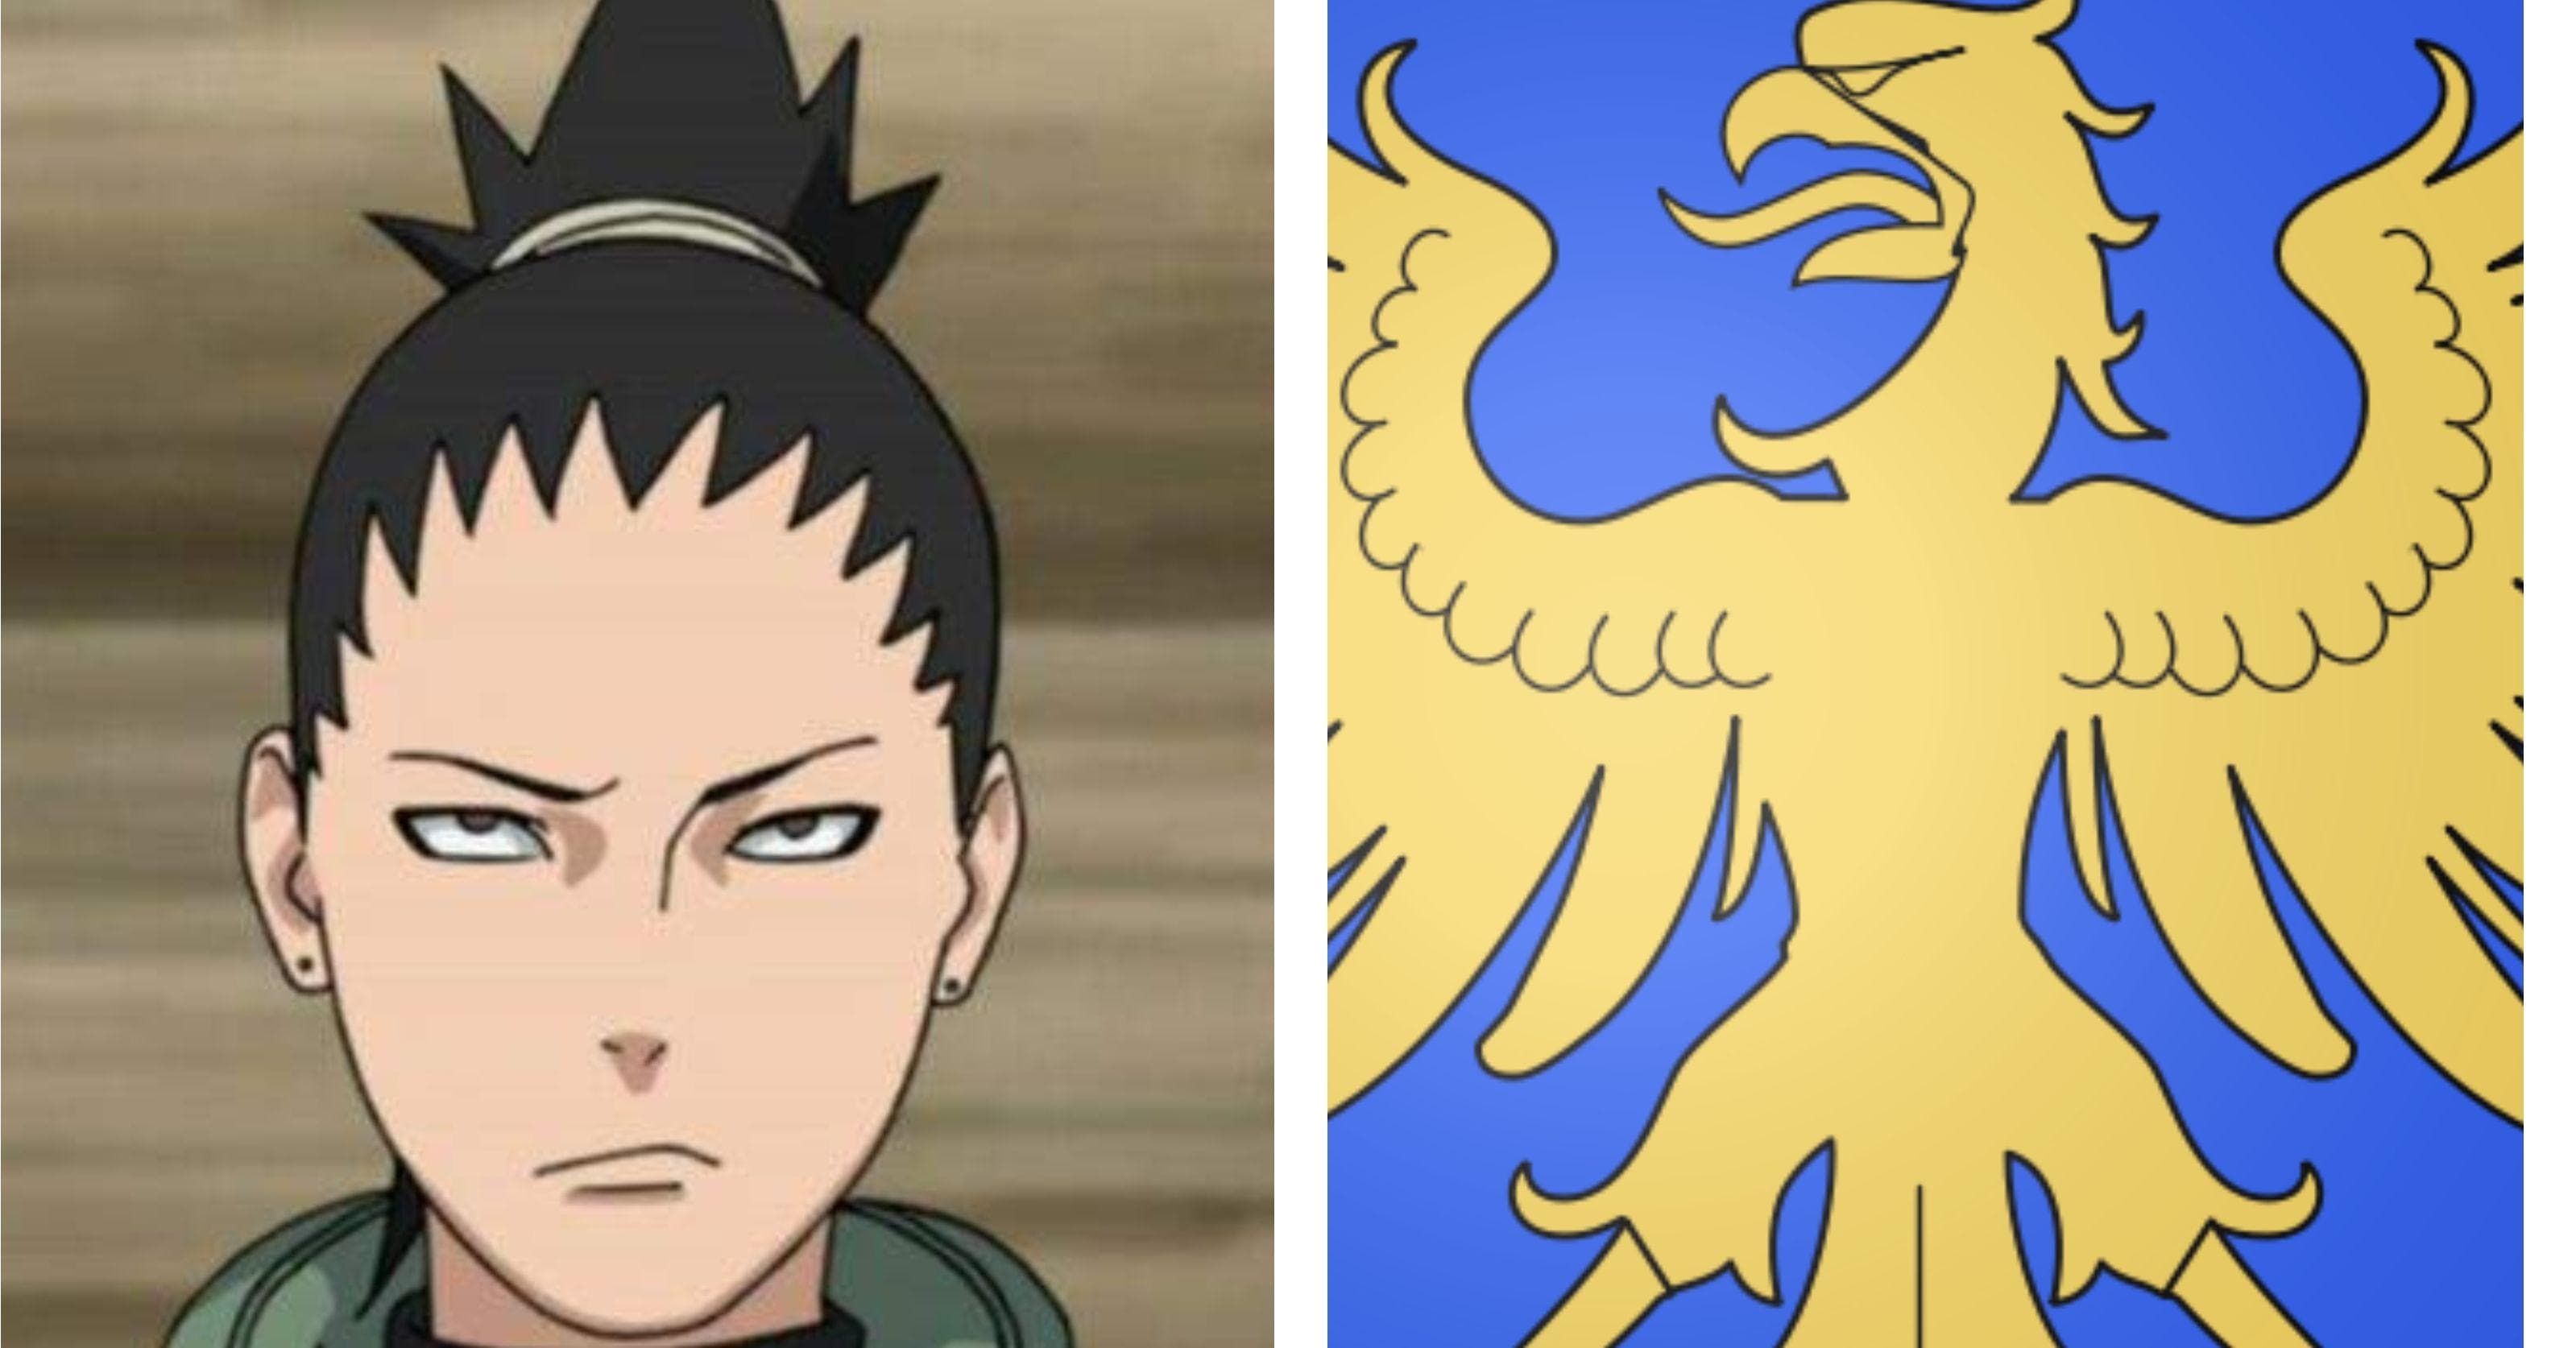 Here's What Hogwarts House Your Favorite Naruto Characters Would Be Placed  In